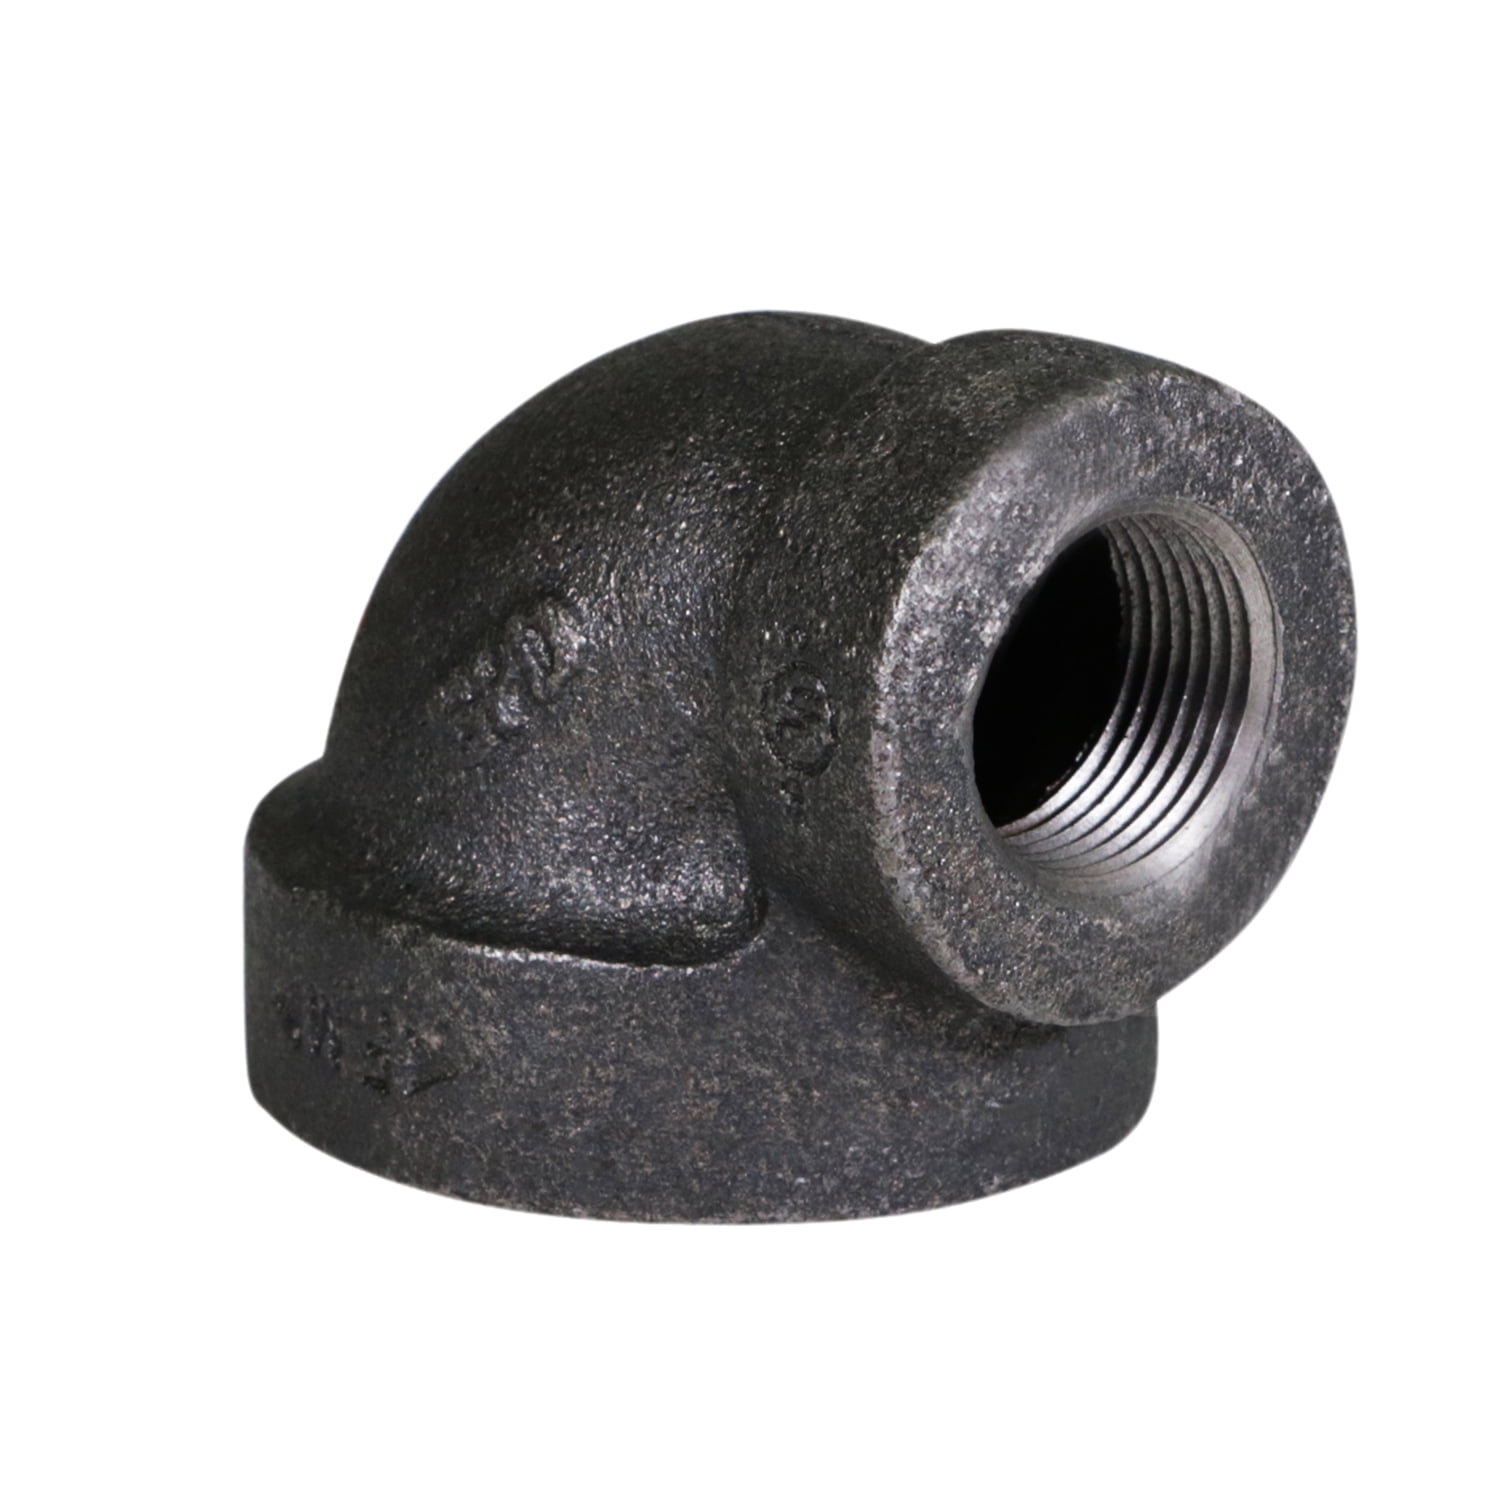 1-1/4" Side Outlet Elbow DEG 90° BLACK MALLEABLE IRON fitting pipe npt 